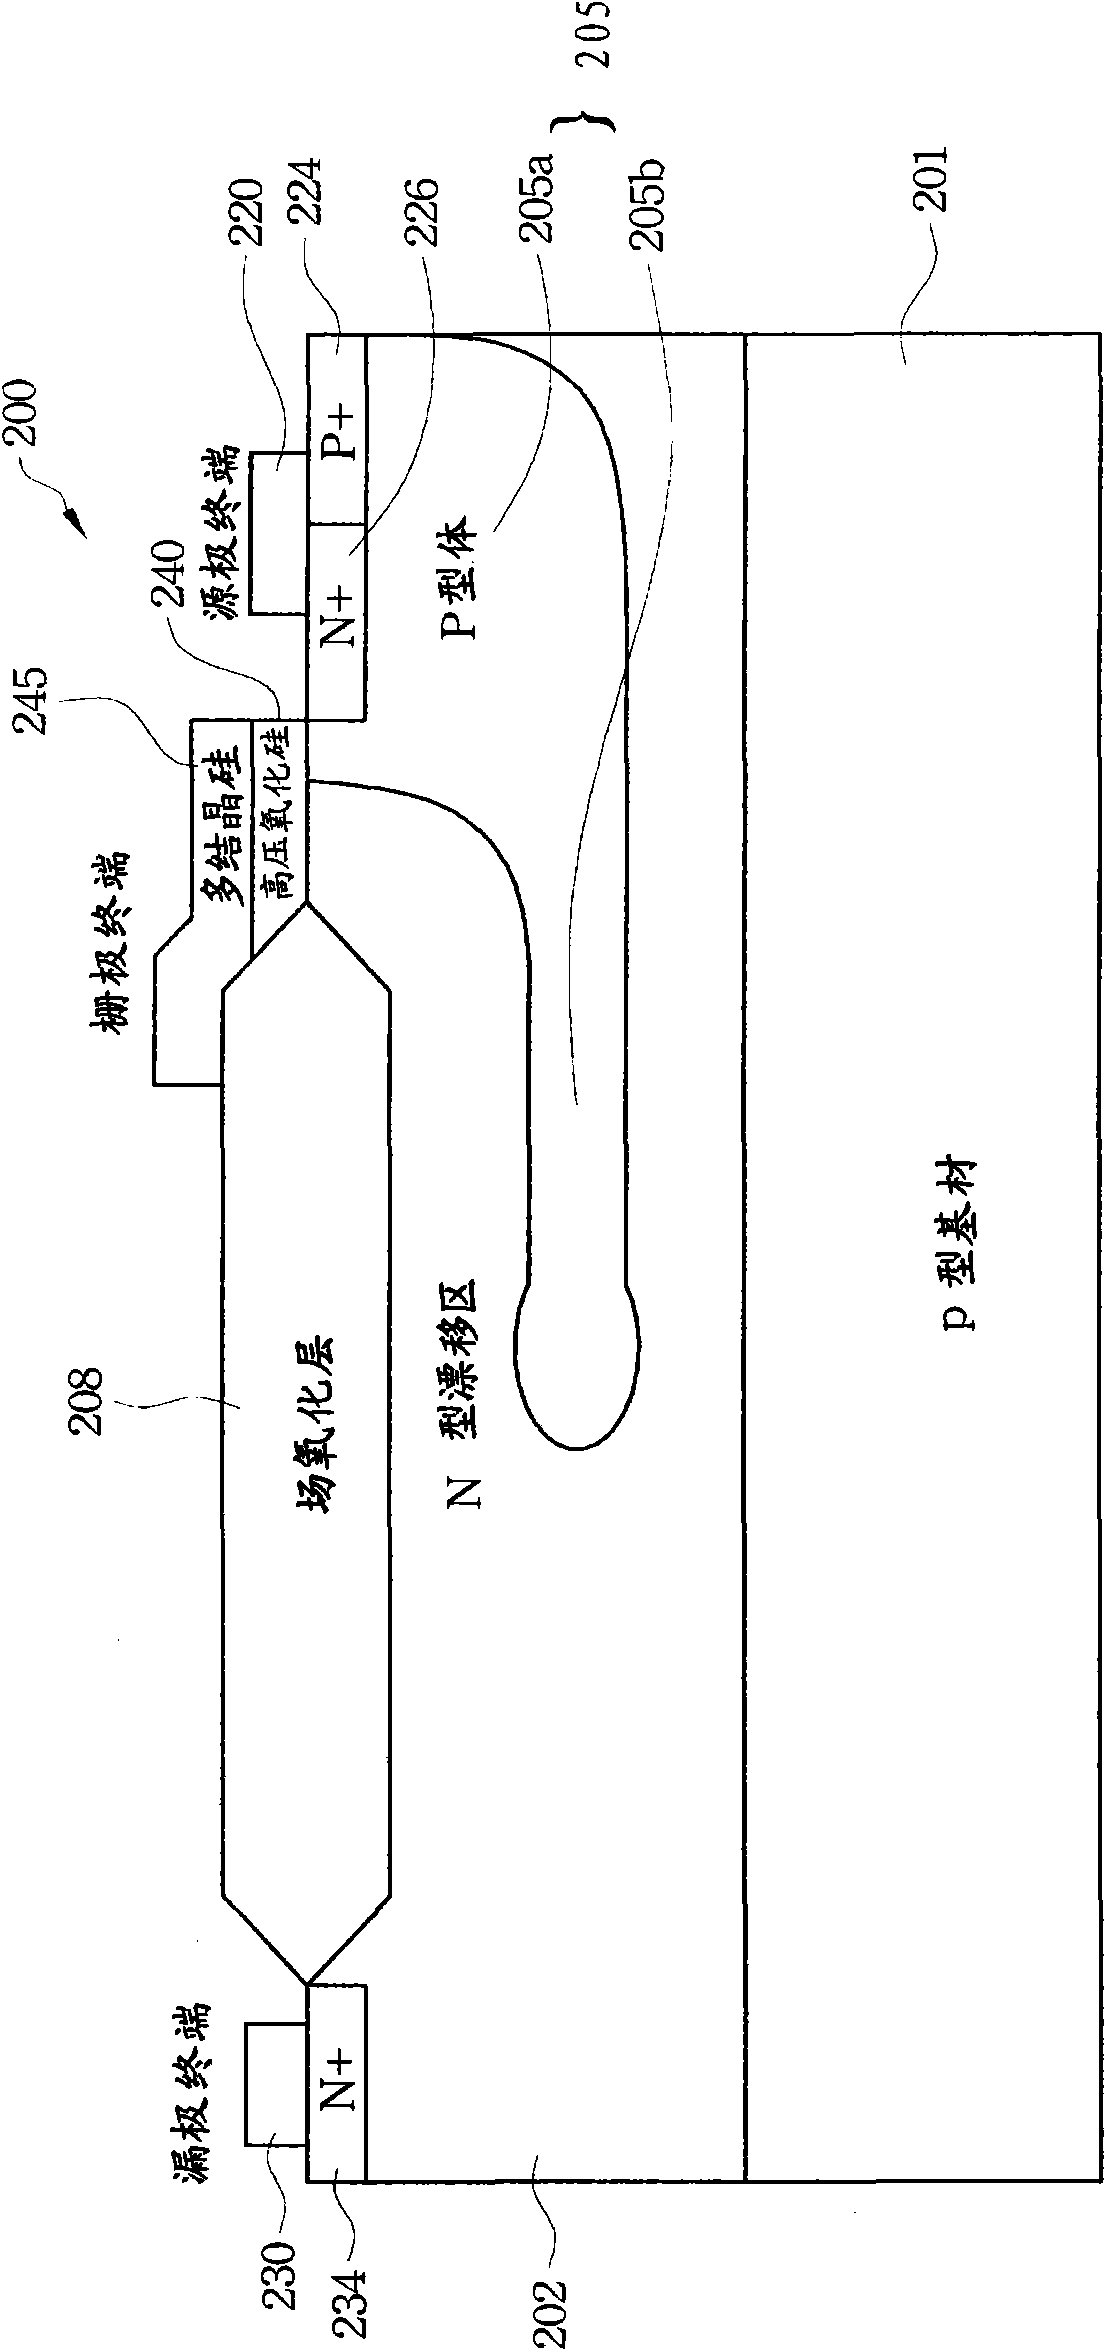 High voltage semiconductor transistor and method of manufacturing same